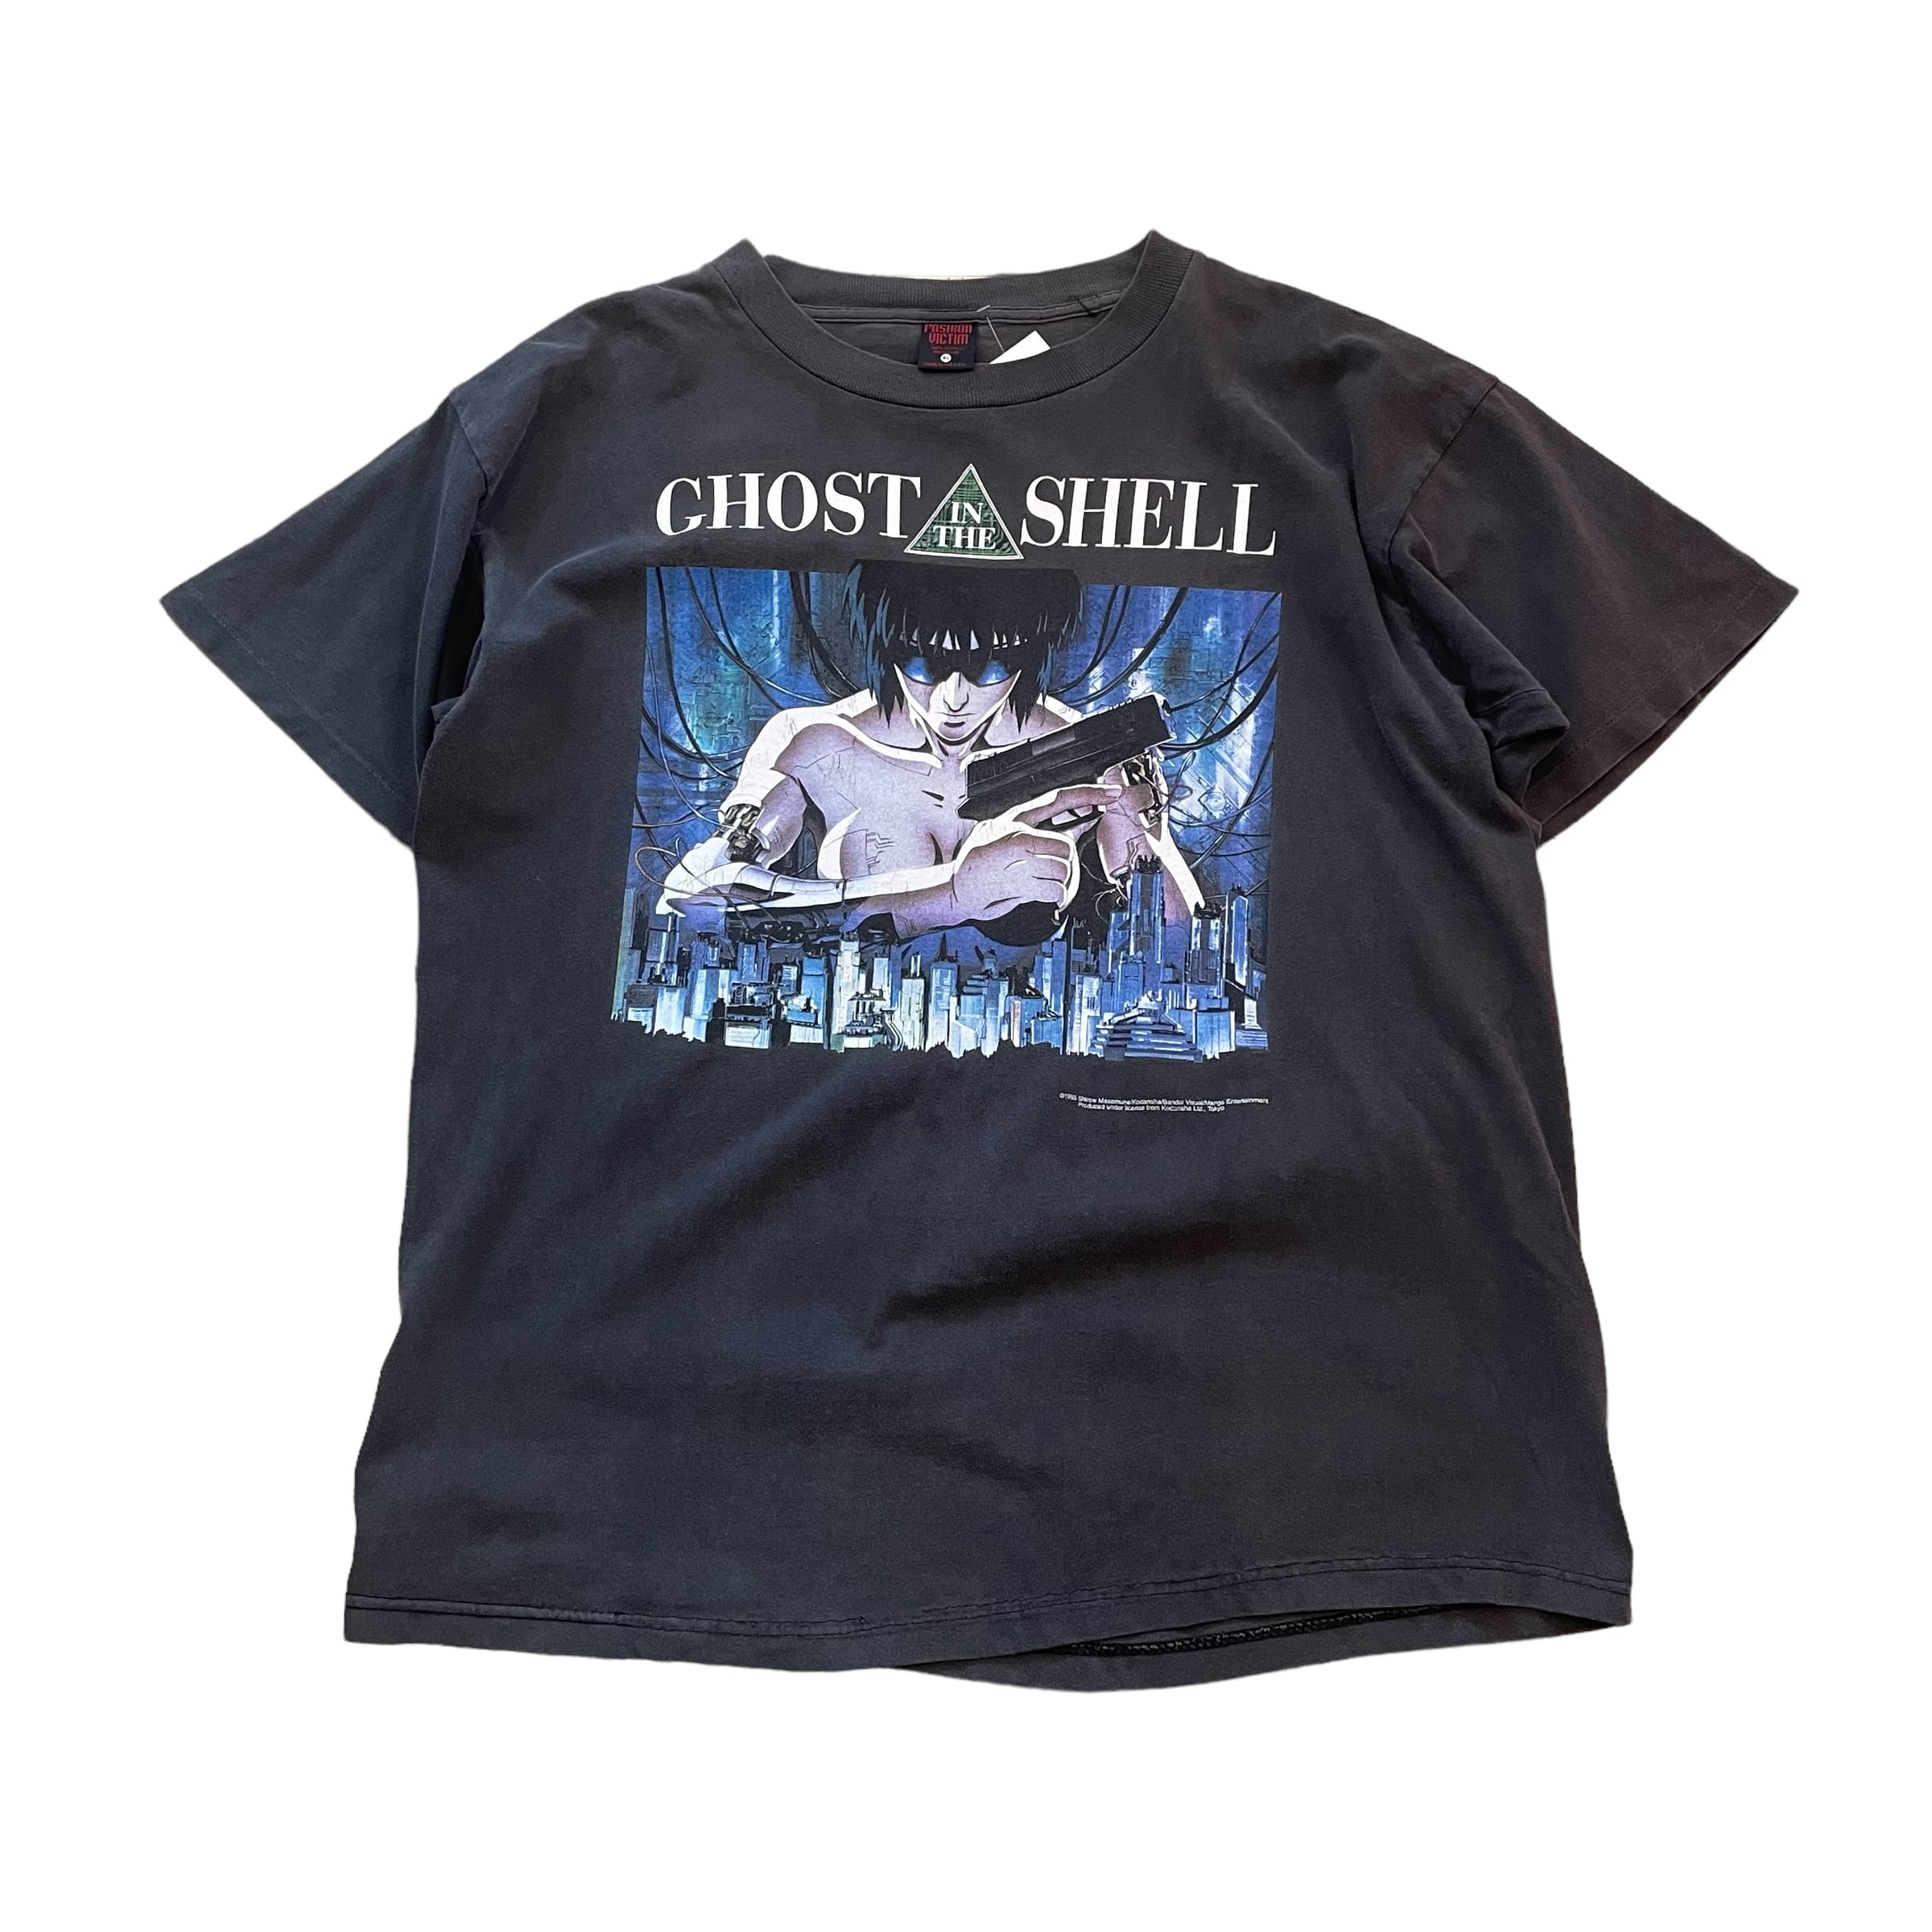 GHOST IN THE SHELL Tシャツ fashion victim